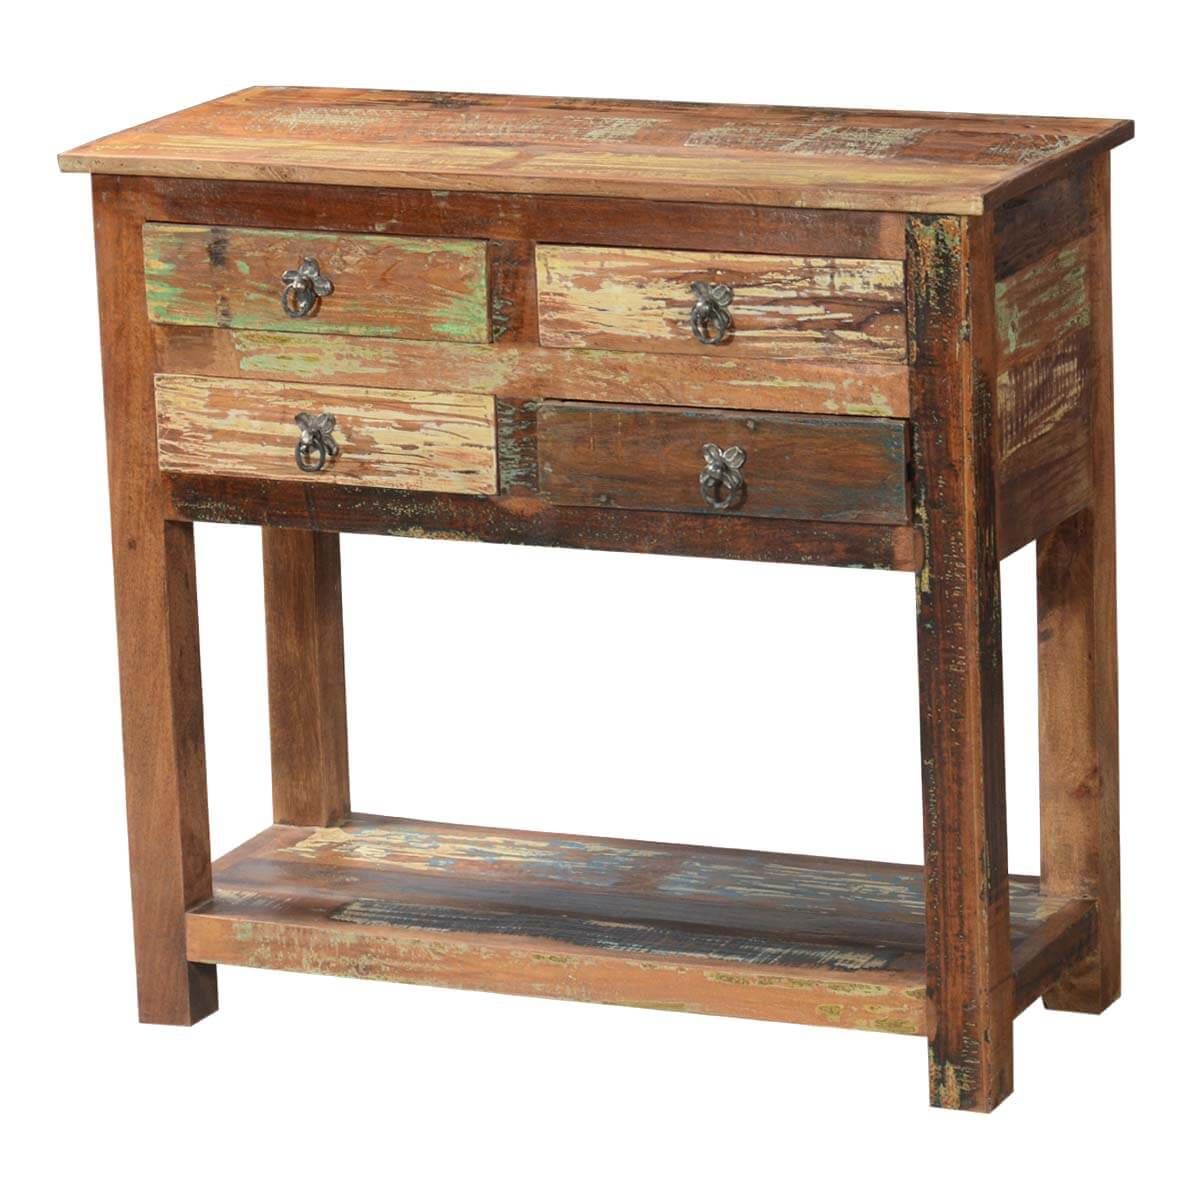 Ashland Rustic Reclaimed Wood 4 Drawer Hallway Console Table Within Barnwood Console Tables (View 2 of 20)